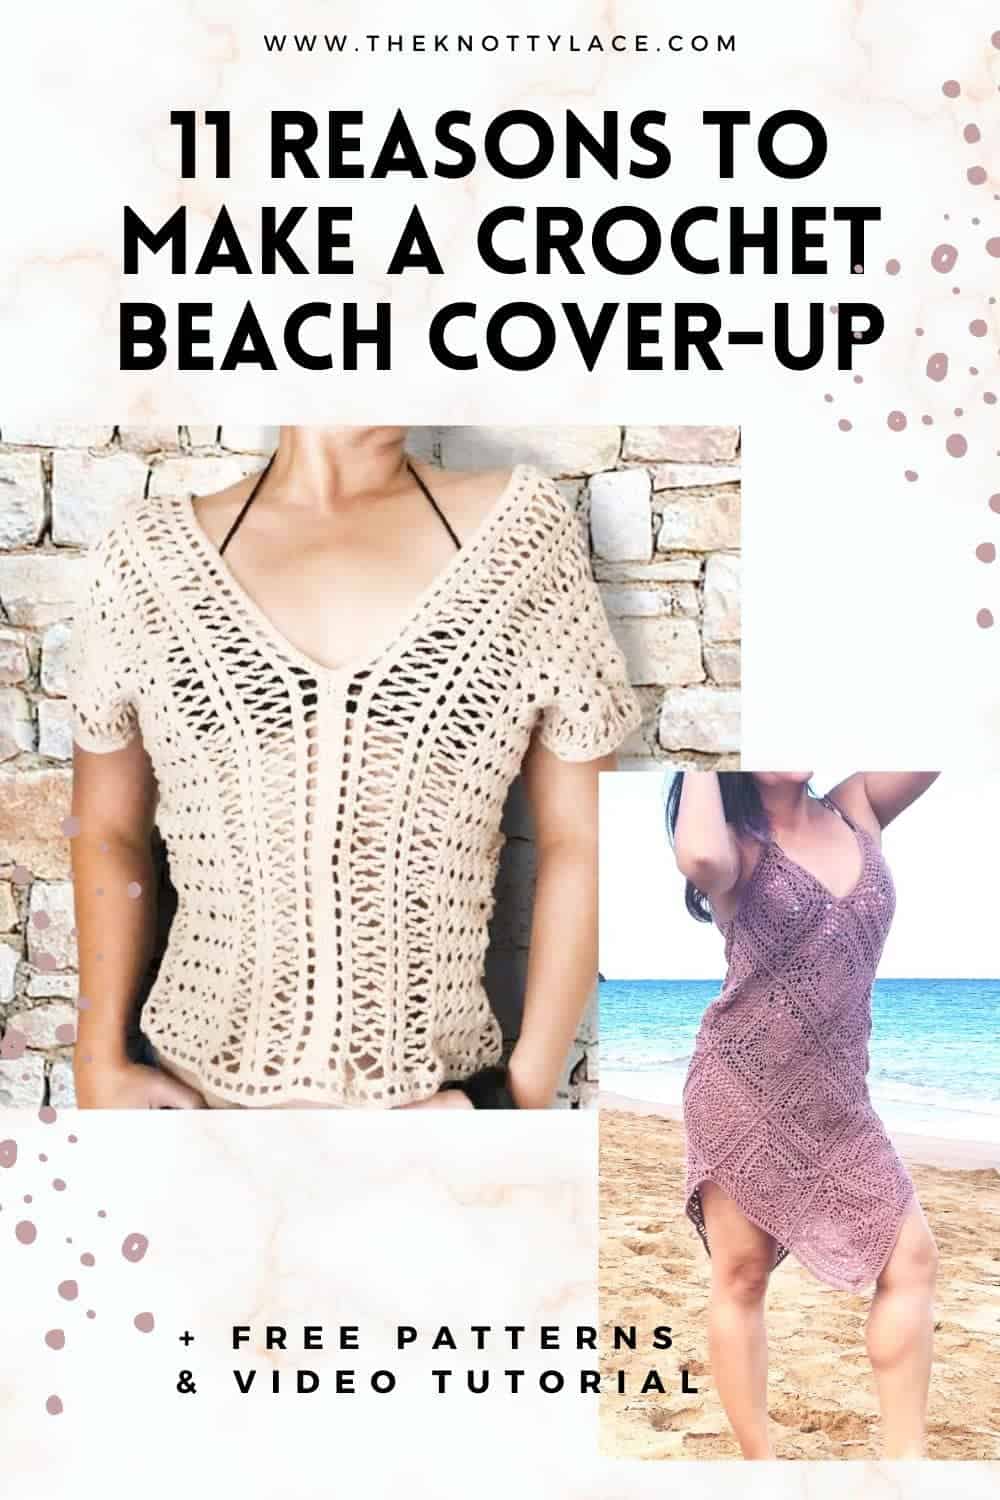 11 reasons to make a crochet beach cover up